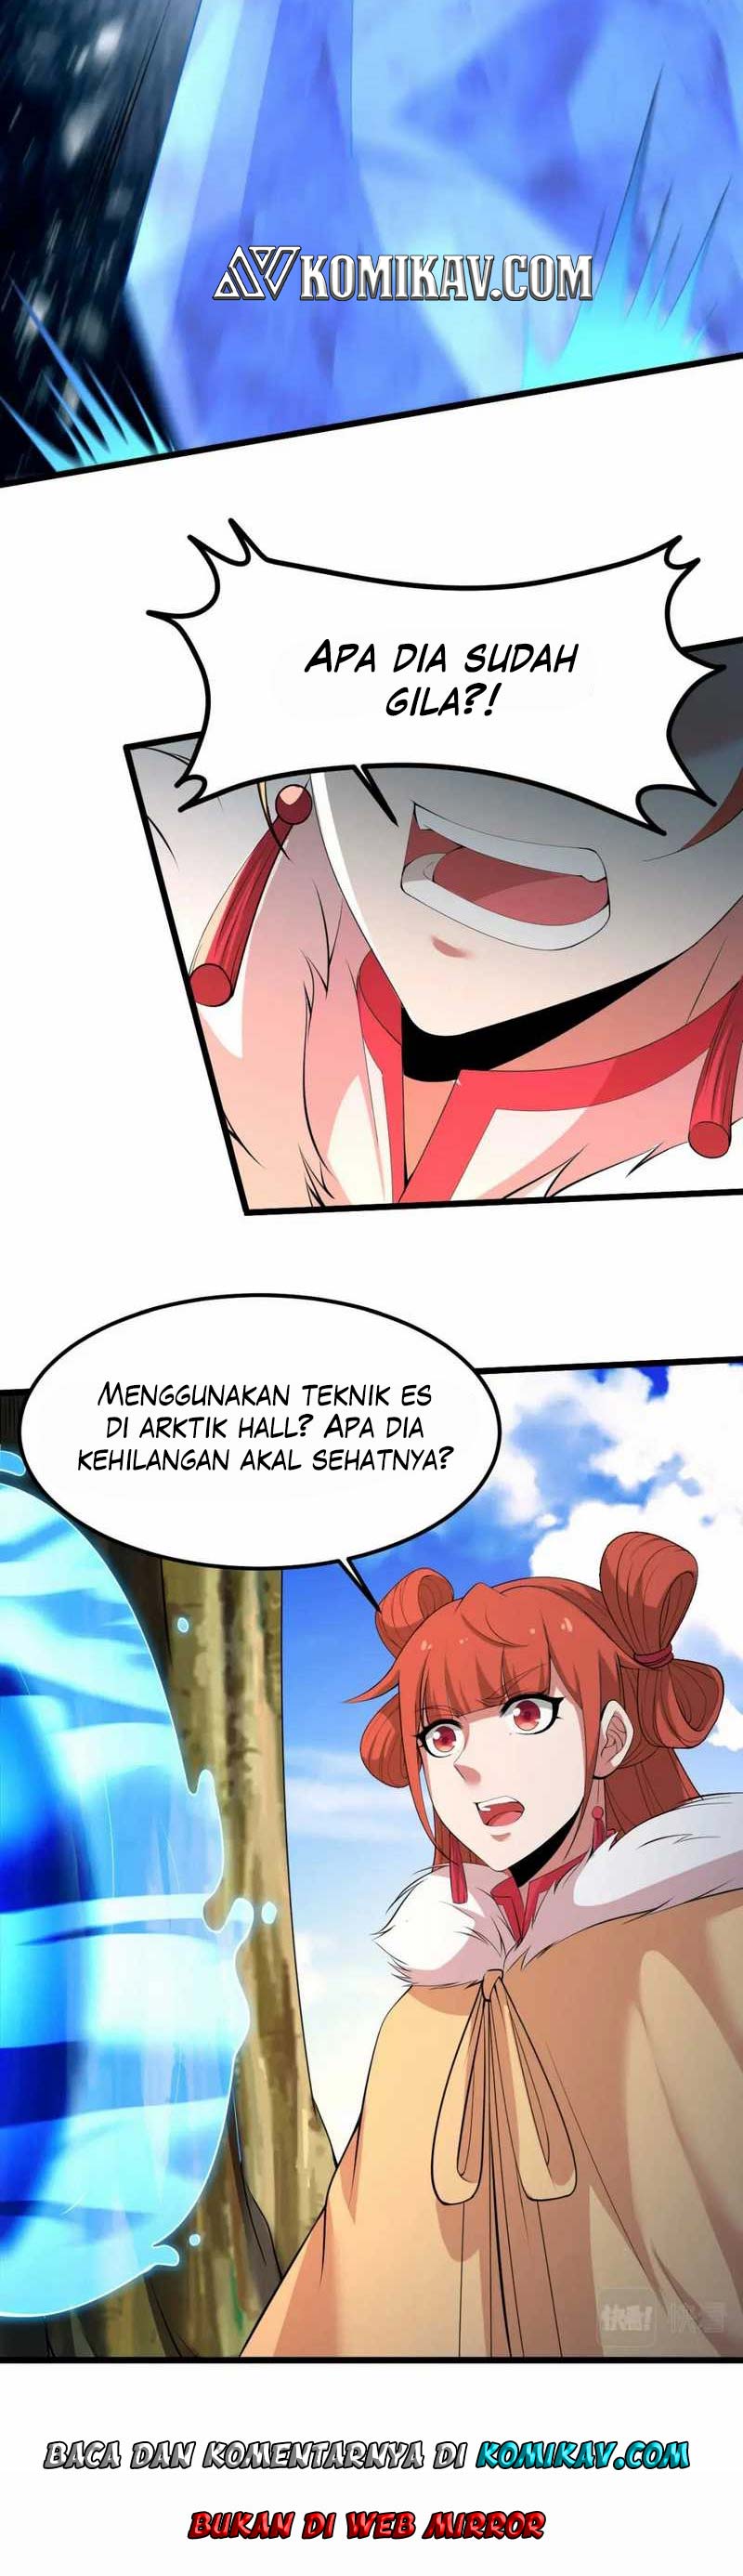 Dilarang COPAS - situs resmi www.mangacanblog.com - Komik i just want to be beaten to death by everyone 147 - chapter 147 148 Indonesia i just want to be beaten to death by everyone 147 - chapter 147 Terbaru 28|Baca Manga Komik Indonesia|Mangacan